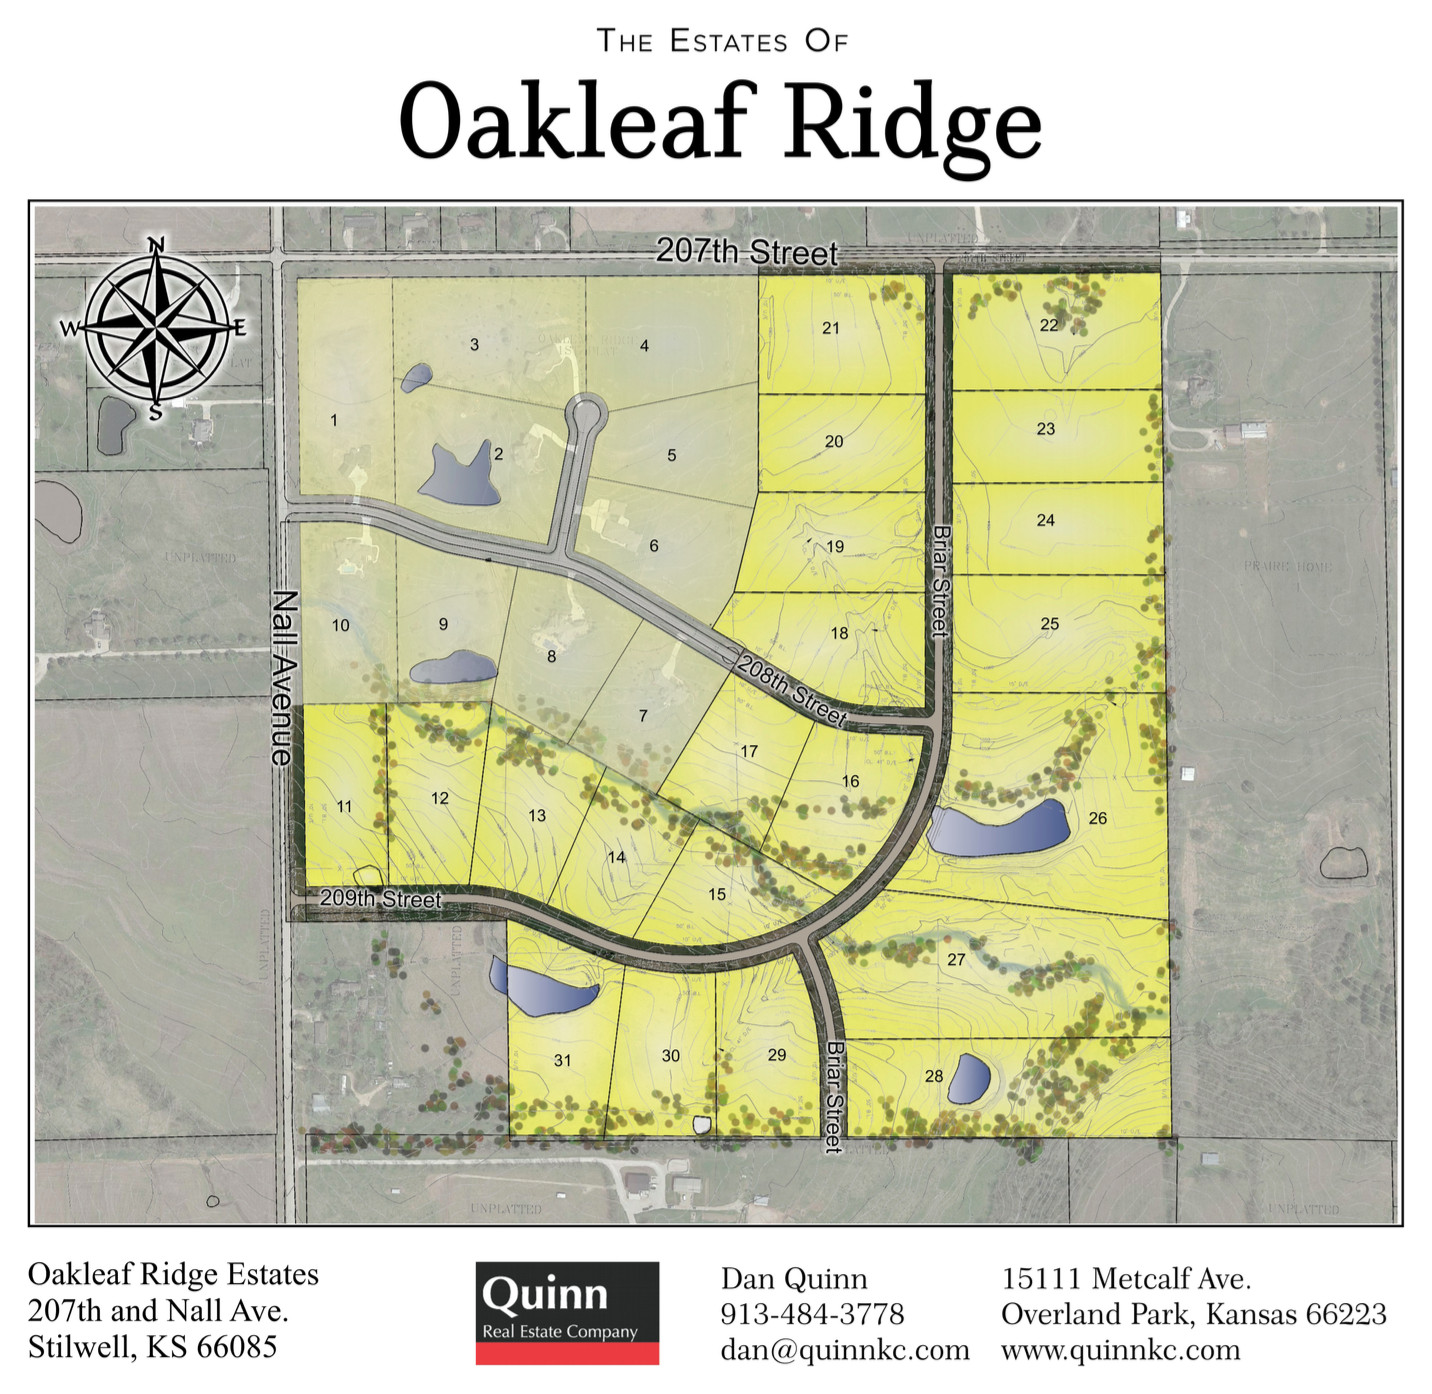 Oakleaf Ridge Estates Second Phase 207th and Nall Avenue For Sale